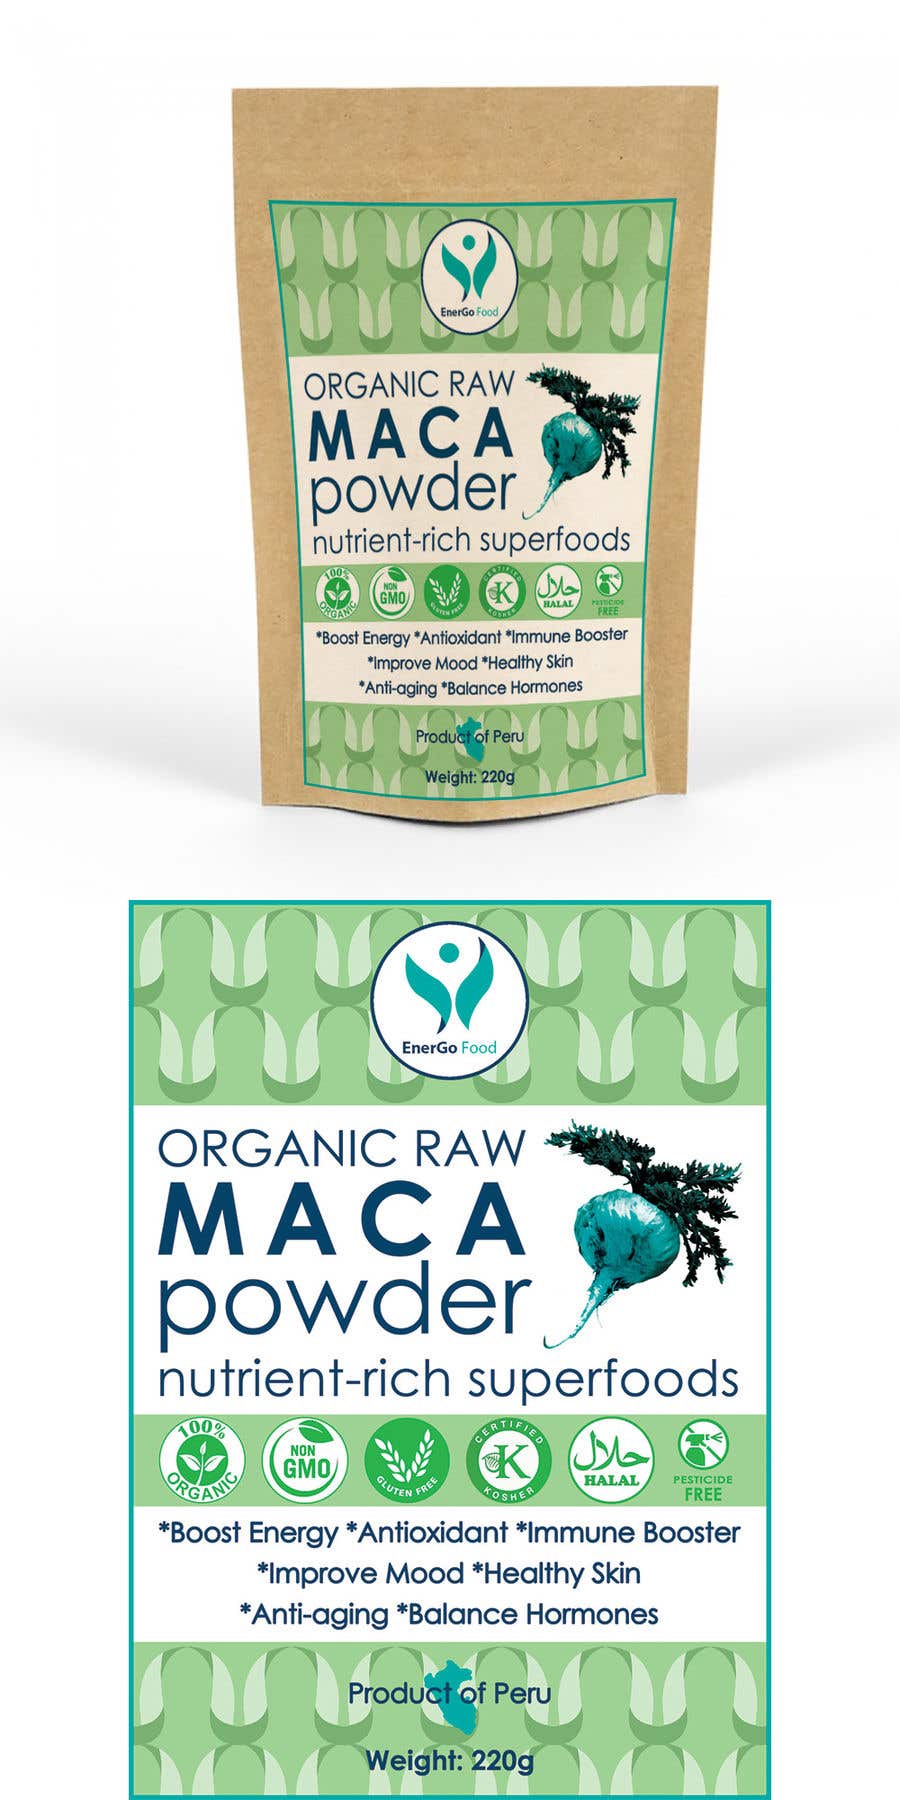 Entri Kontes #8 untuk                                                Design Product Packaging label for Bags with Superfood products in Photoshop
                                            